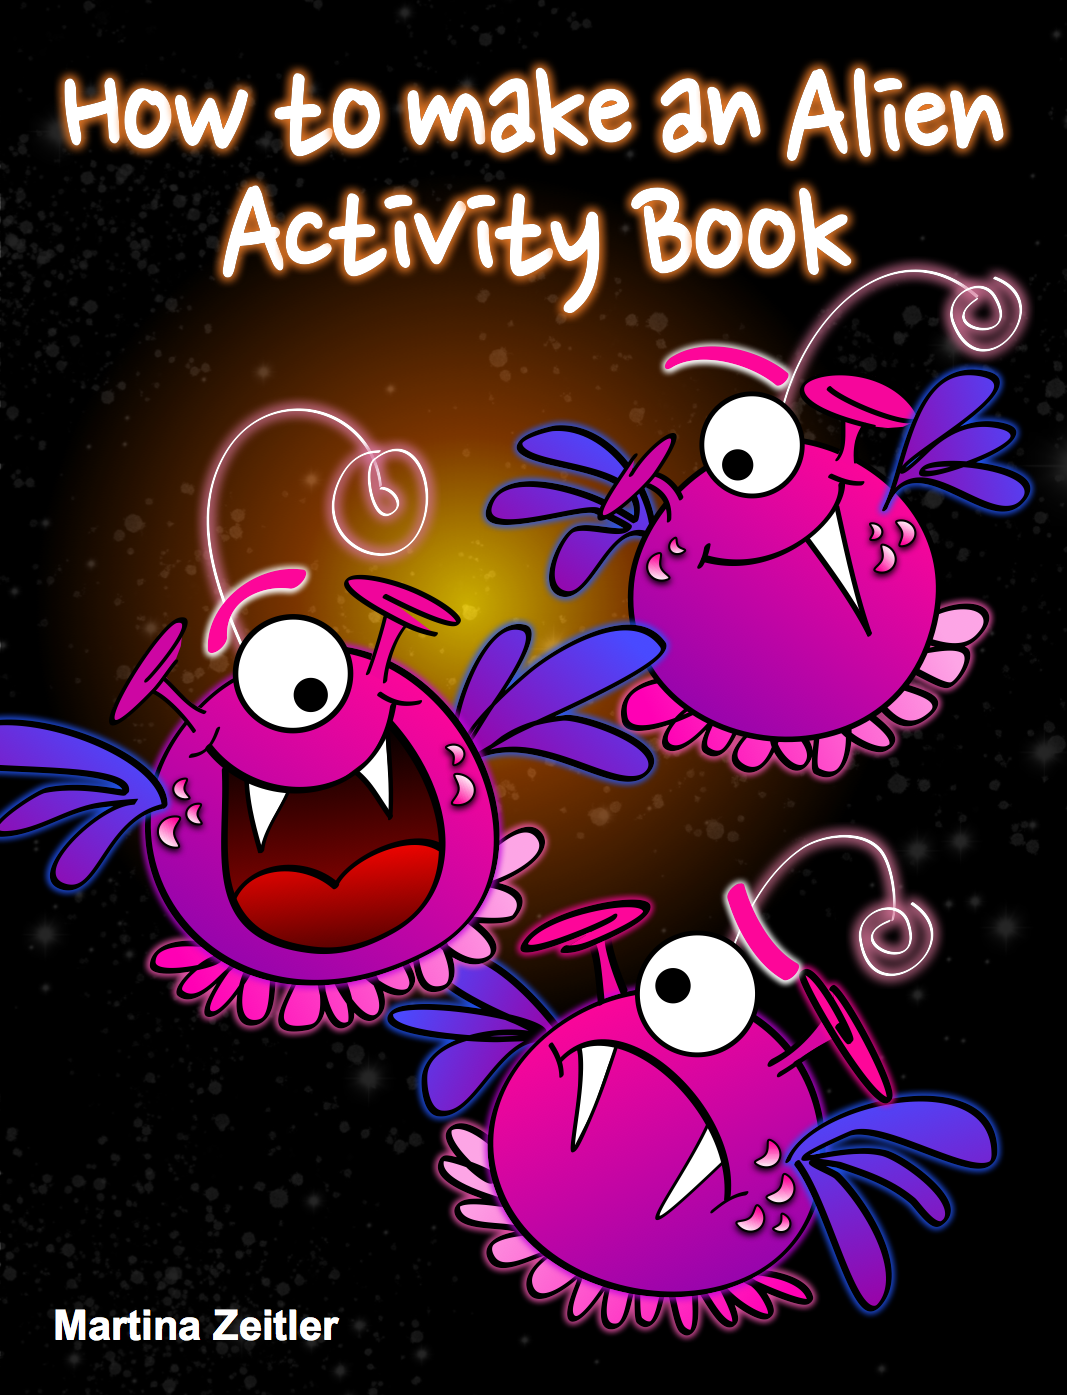 Free multi-touch activity book on aliens for iPad